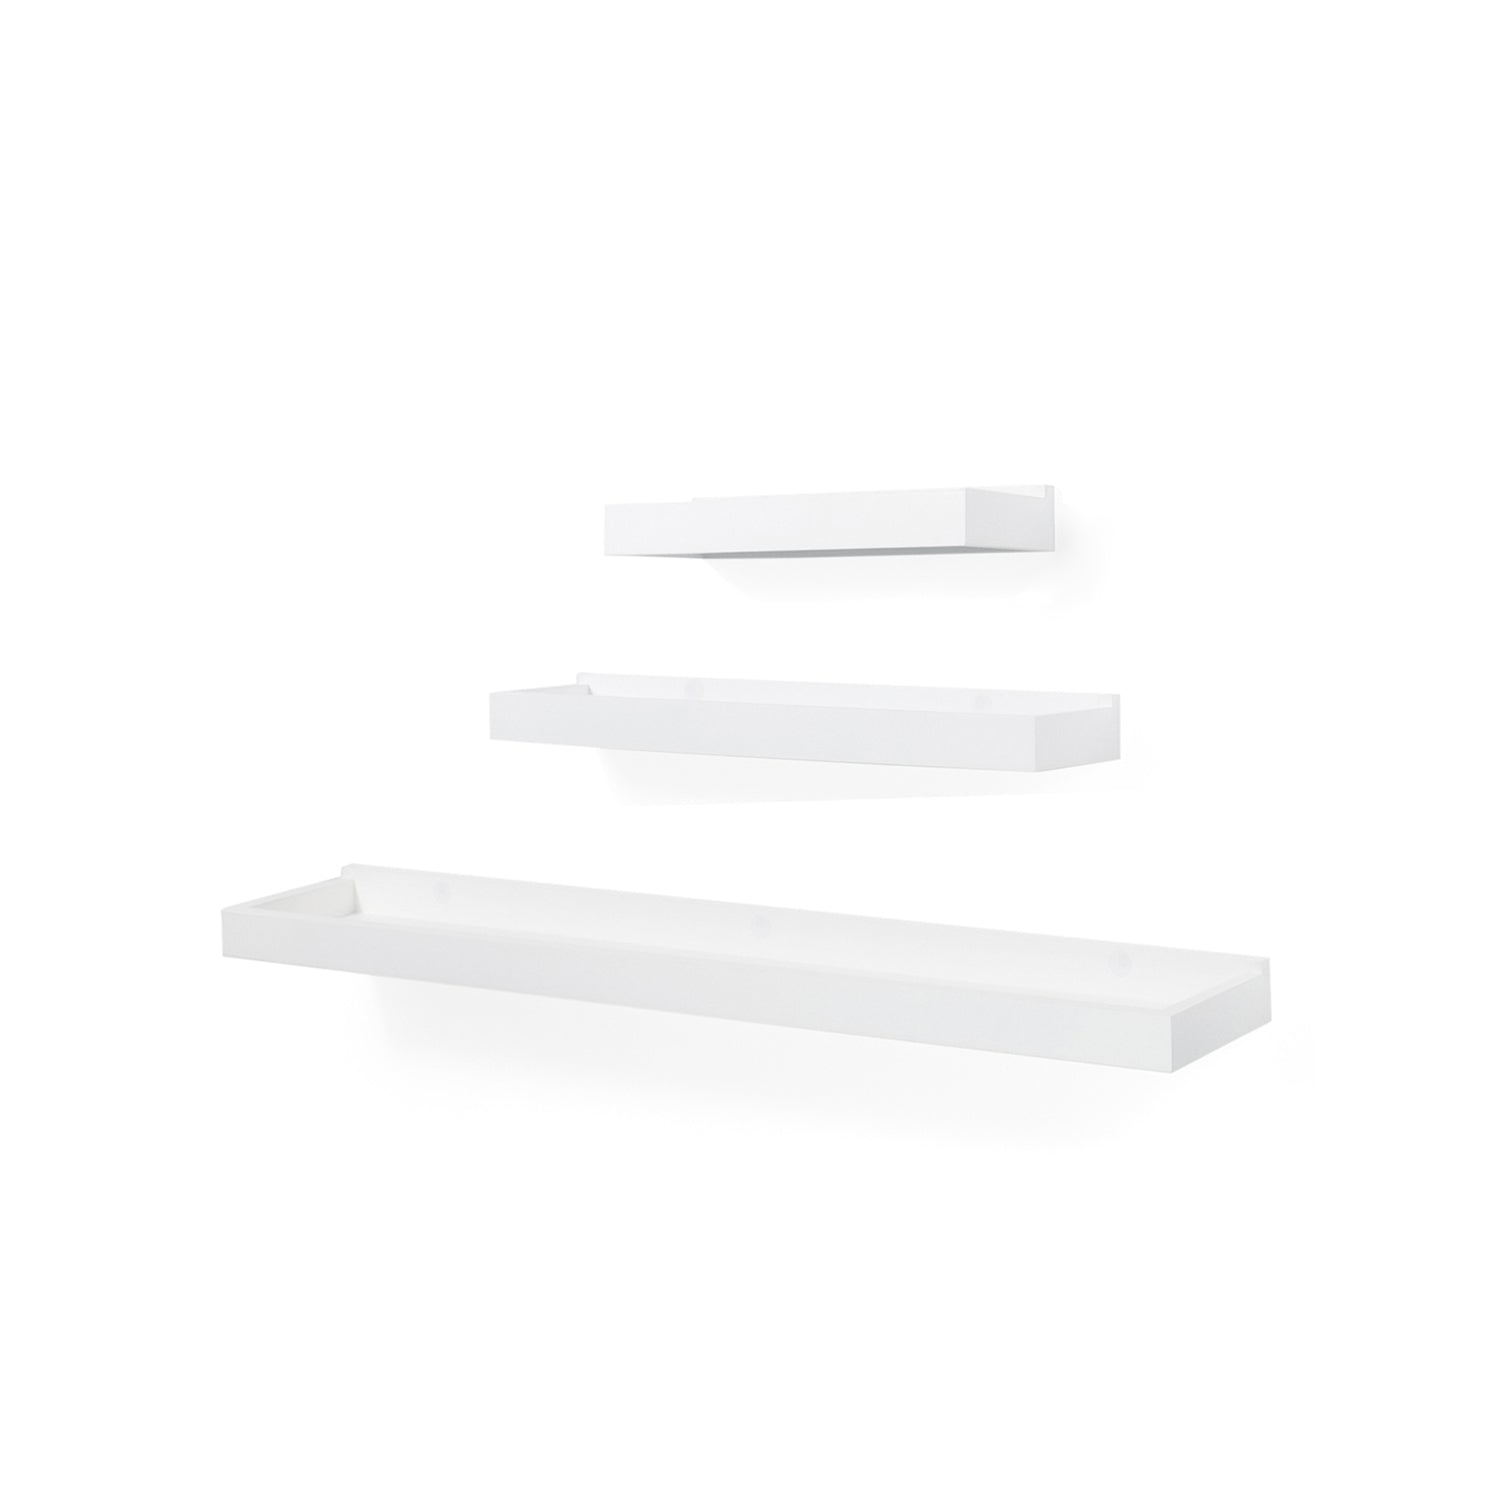 PHILLY Floating Shelves Wall Bookshelf and Picture Ledge - Multisize - Set of 3 - White, Navy Blue, Gray, Walnut - Wallniture